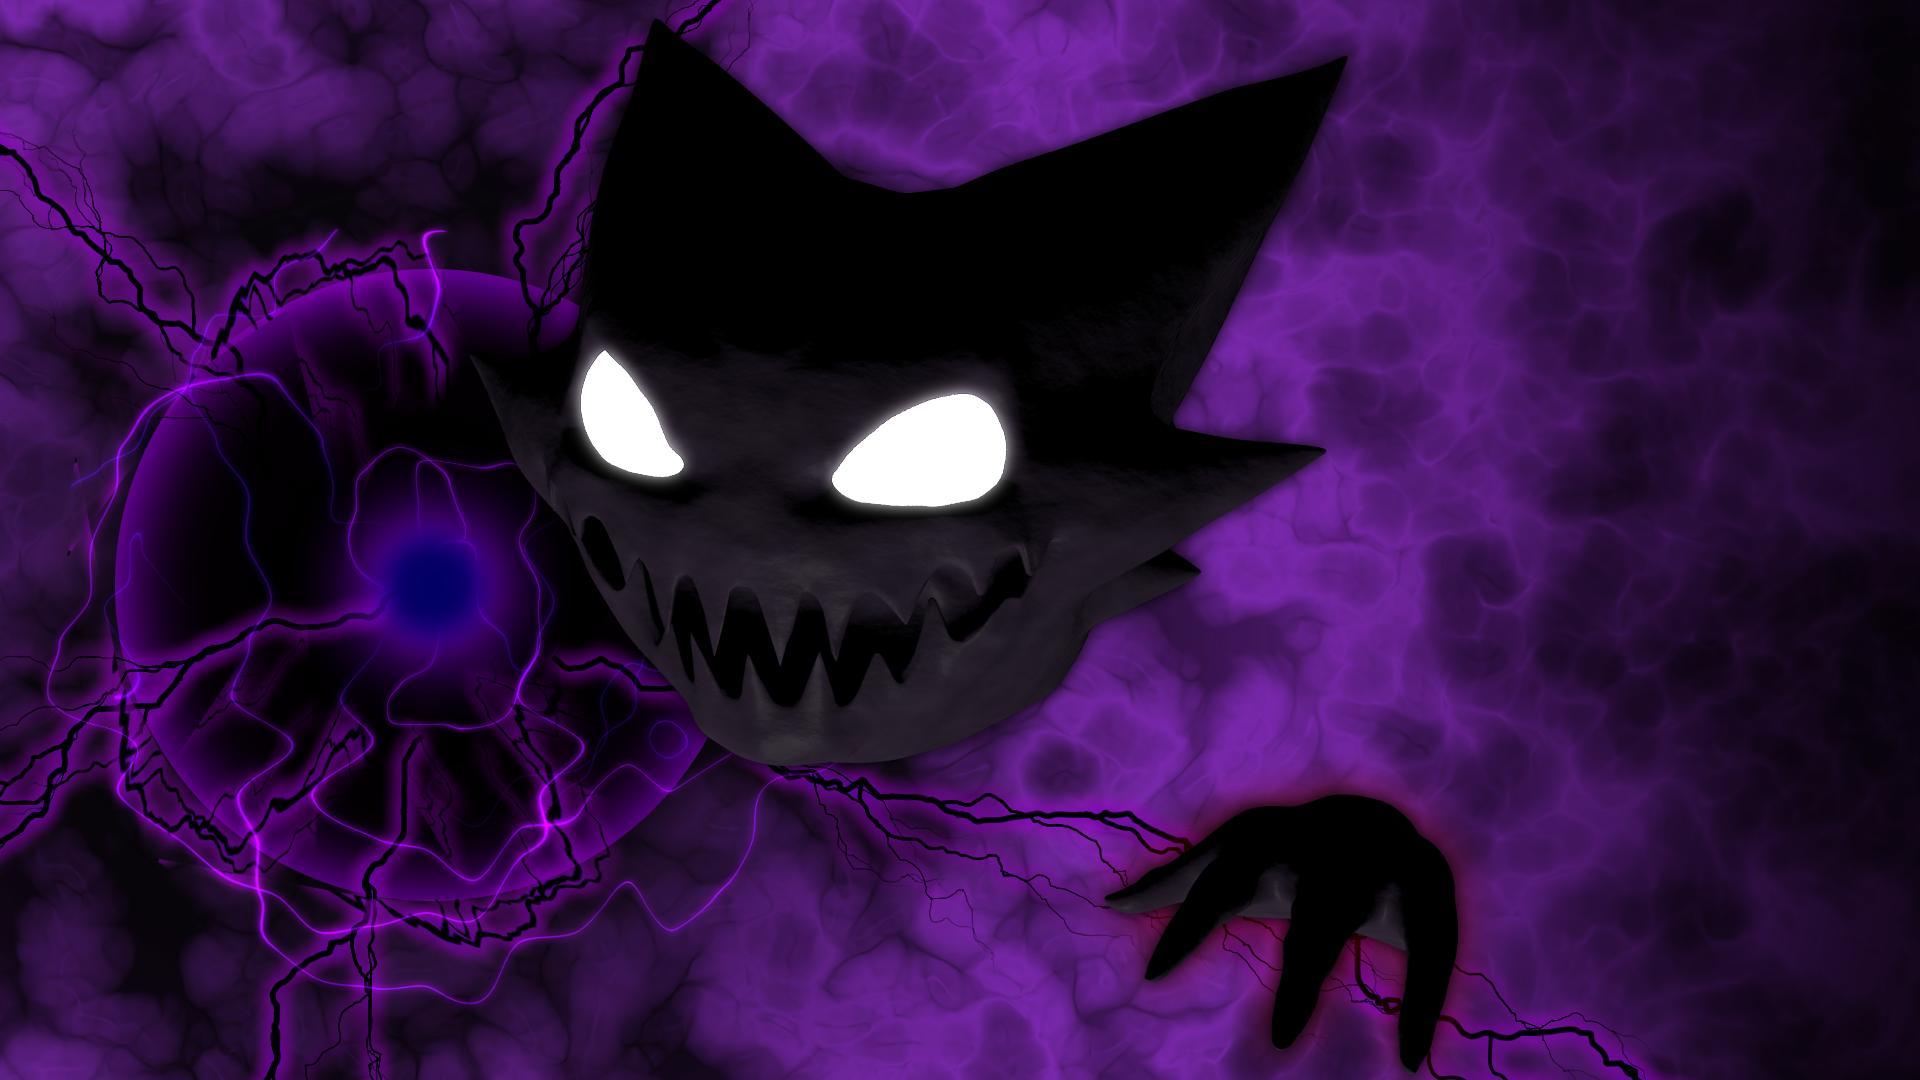 I made a Haunter using shadowball (wallpaper quality 1920x1080) what